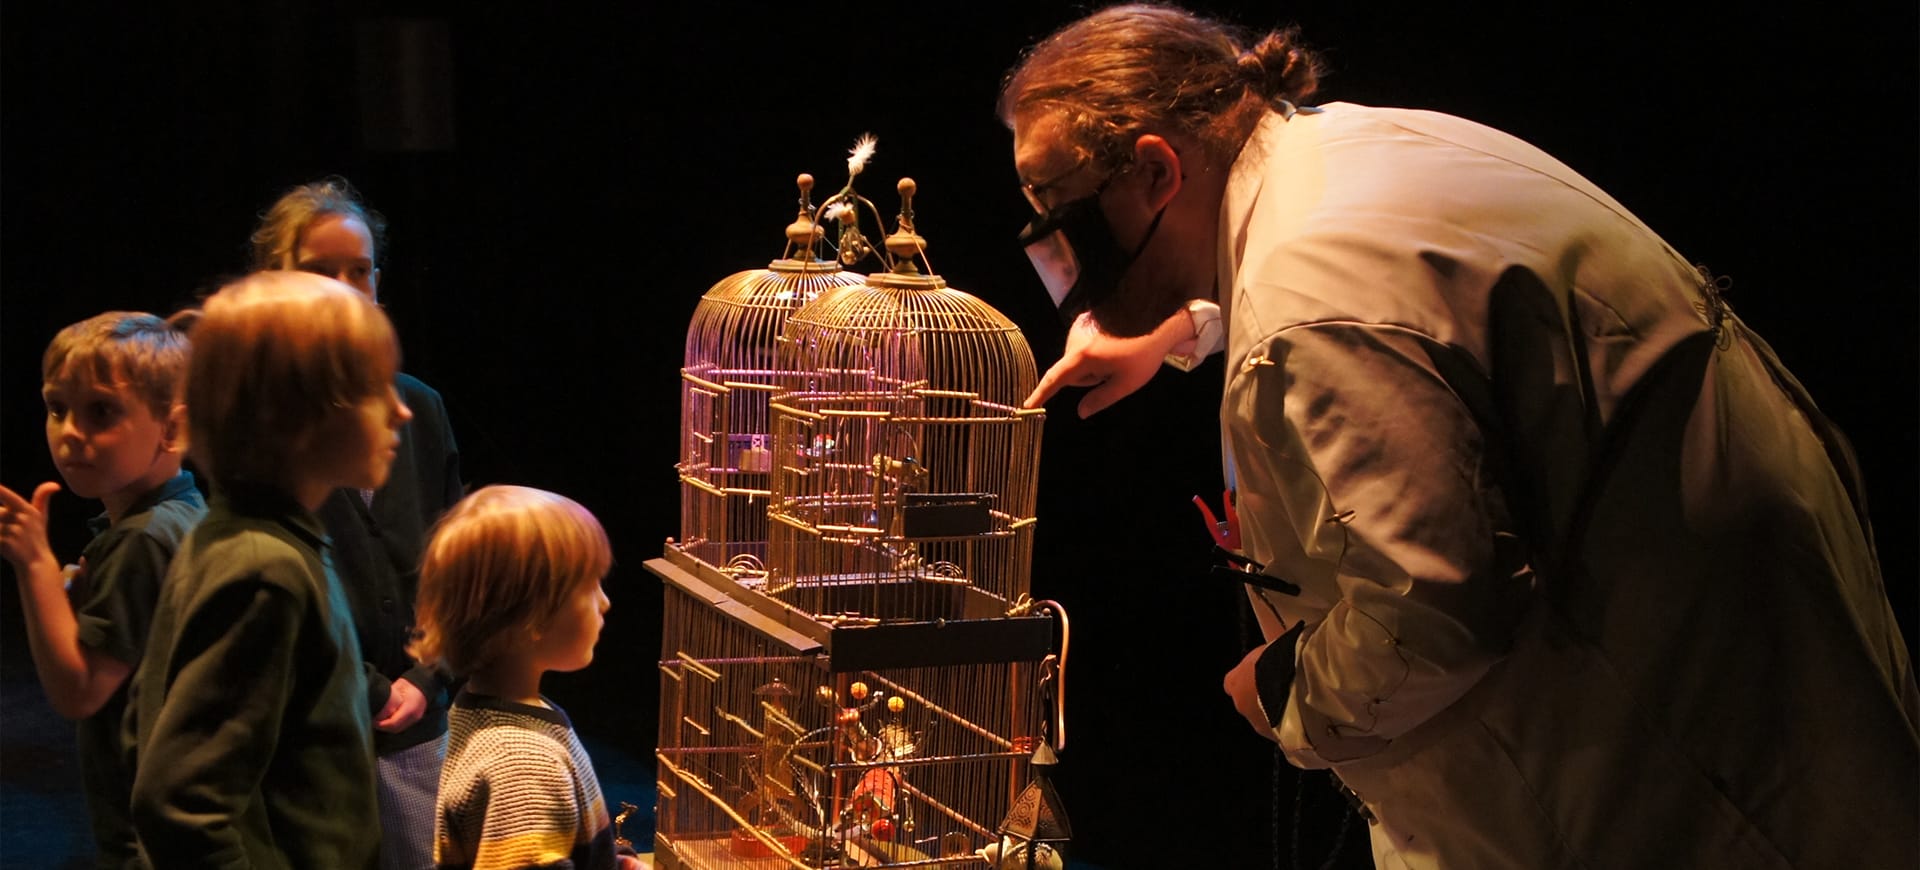 A man in a lab coat shows children robots in a cage for Thimgamabobas